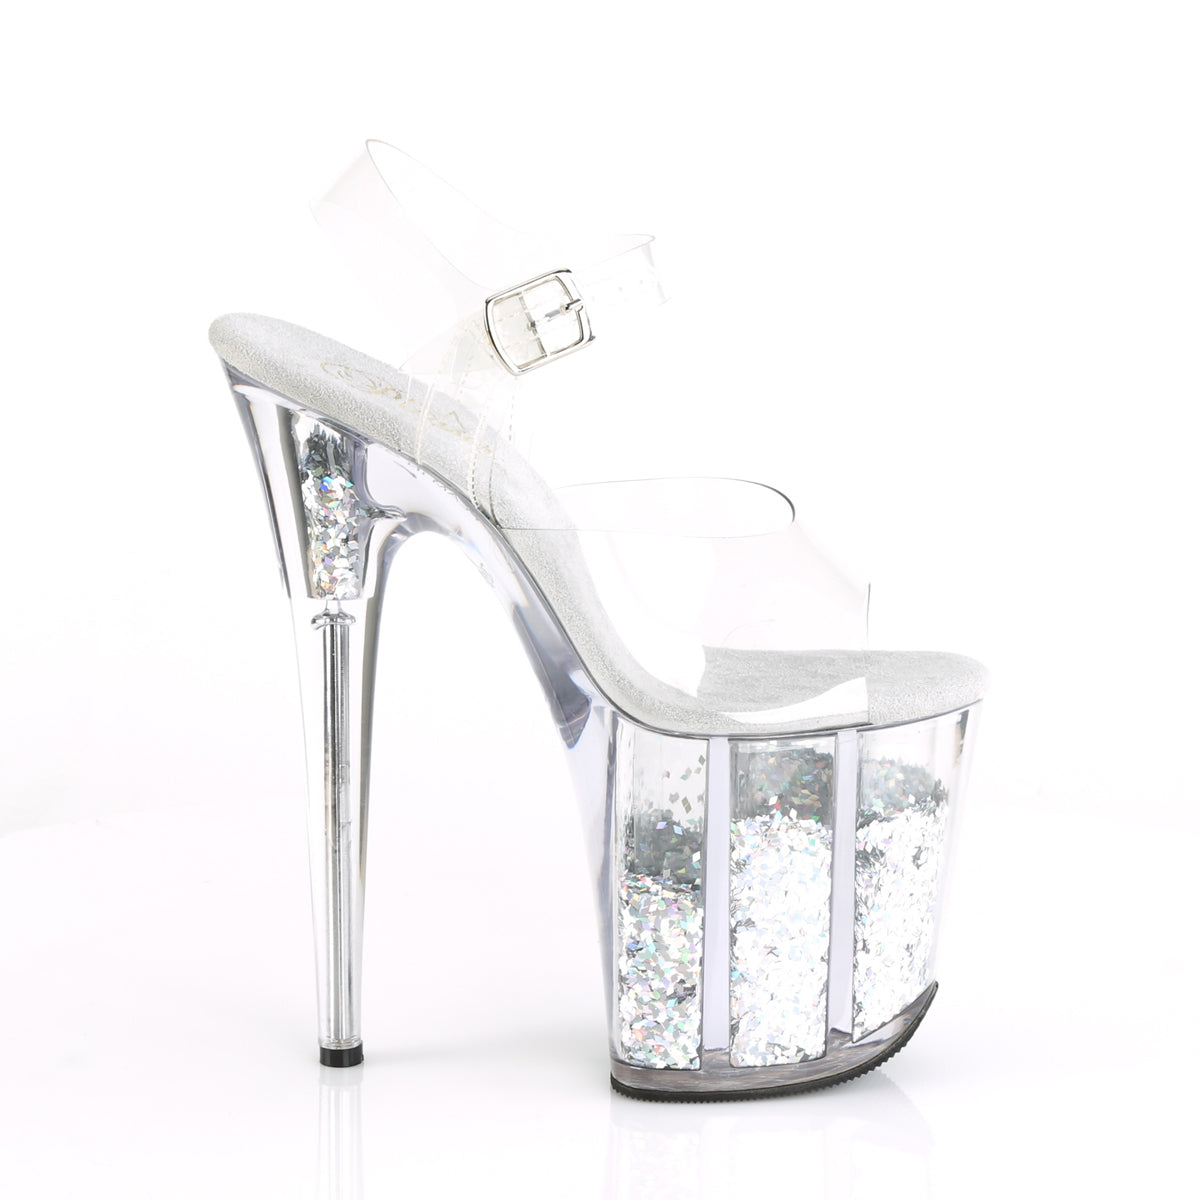 FLAMINGO-808GF 8" Heel Clear Silver Glitter Strippers Shoes-Pleaser- Sexy Shoes Fetish Heels